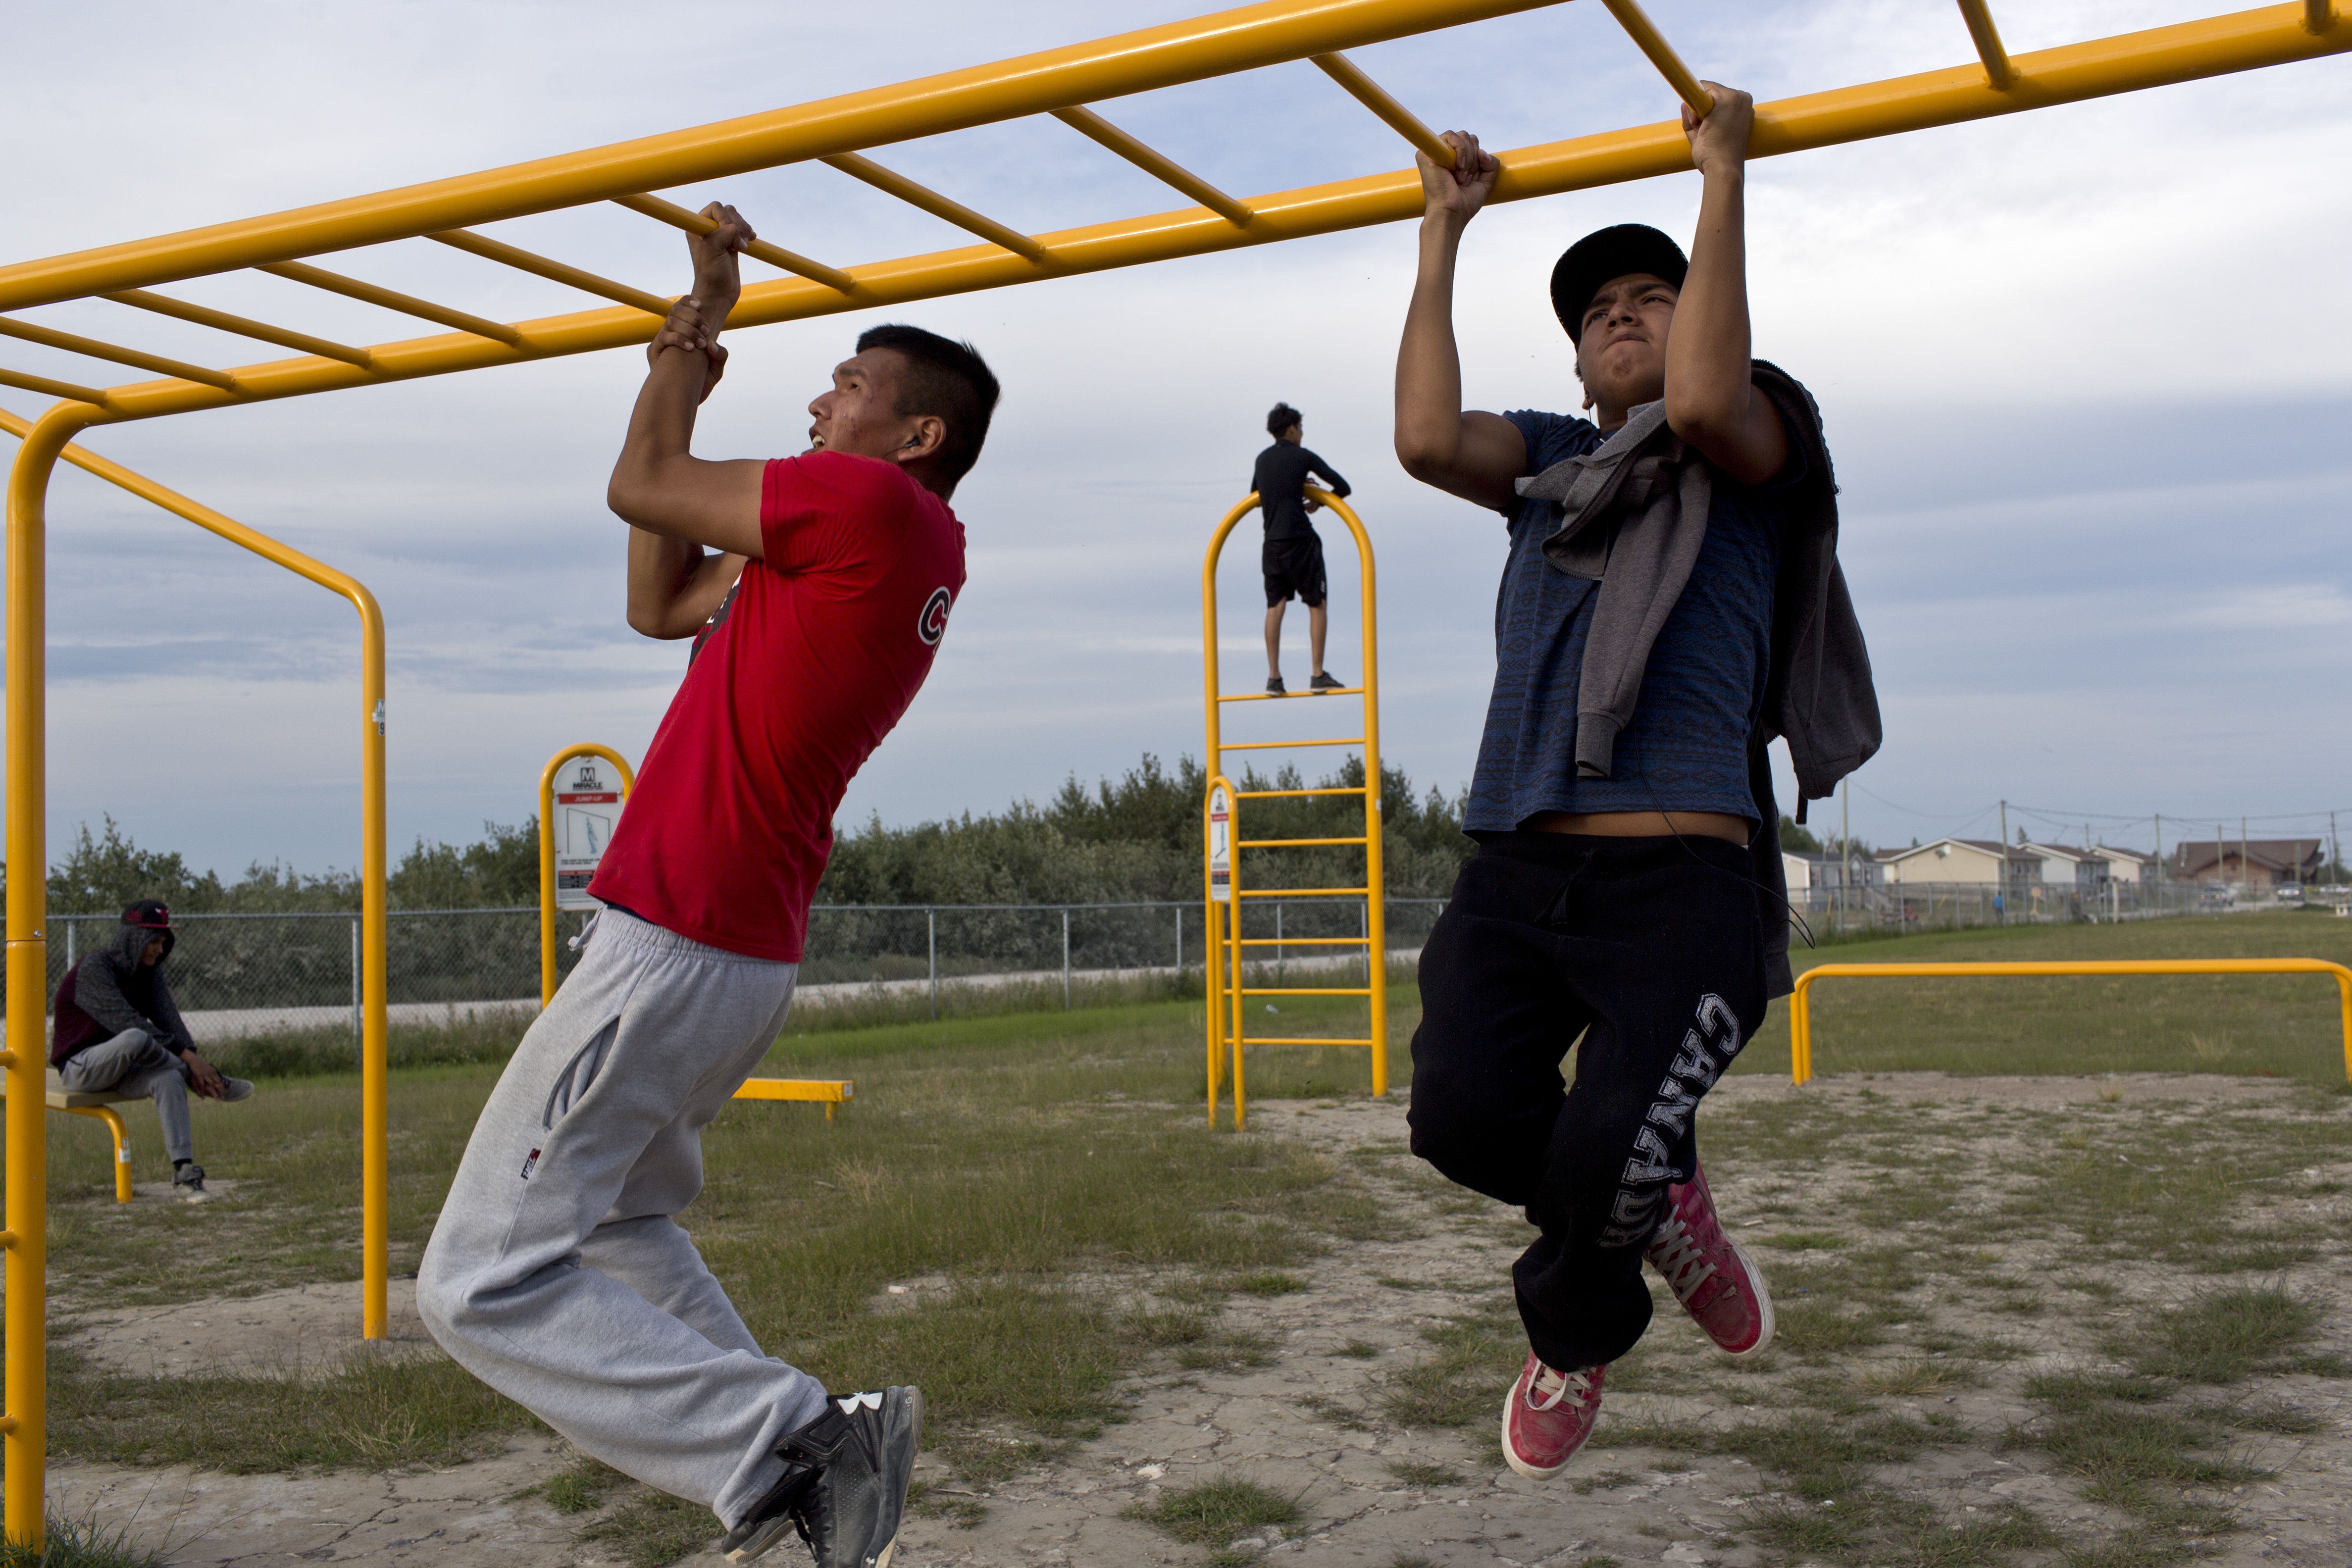 I was confronted on a regular basis by images of members of the Attawpiskat First Nation in a context that we are not used to seeing in the media. This particular group of young men were at the outdoor playground most days exercising and doing good things for their bodies. It would be irresponsible to overlook the problems that exist in Attawapiskat, but the traditional narrative attached to young First Nations men has typically overlooked positive outcomes and focused only on negativity, which in turn feeds a stereotype that presents low expectations for them. Image by David Maurice Smith. Canada, 2016.